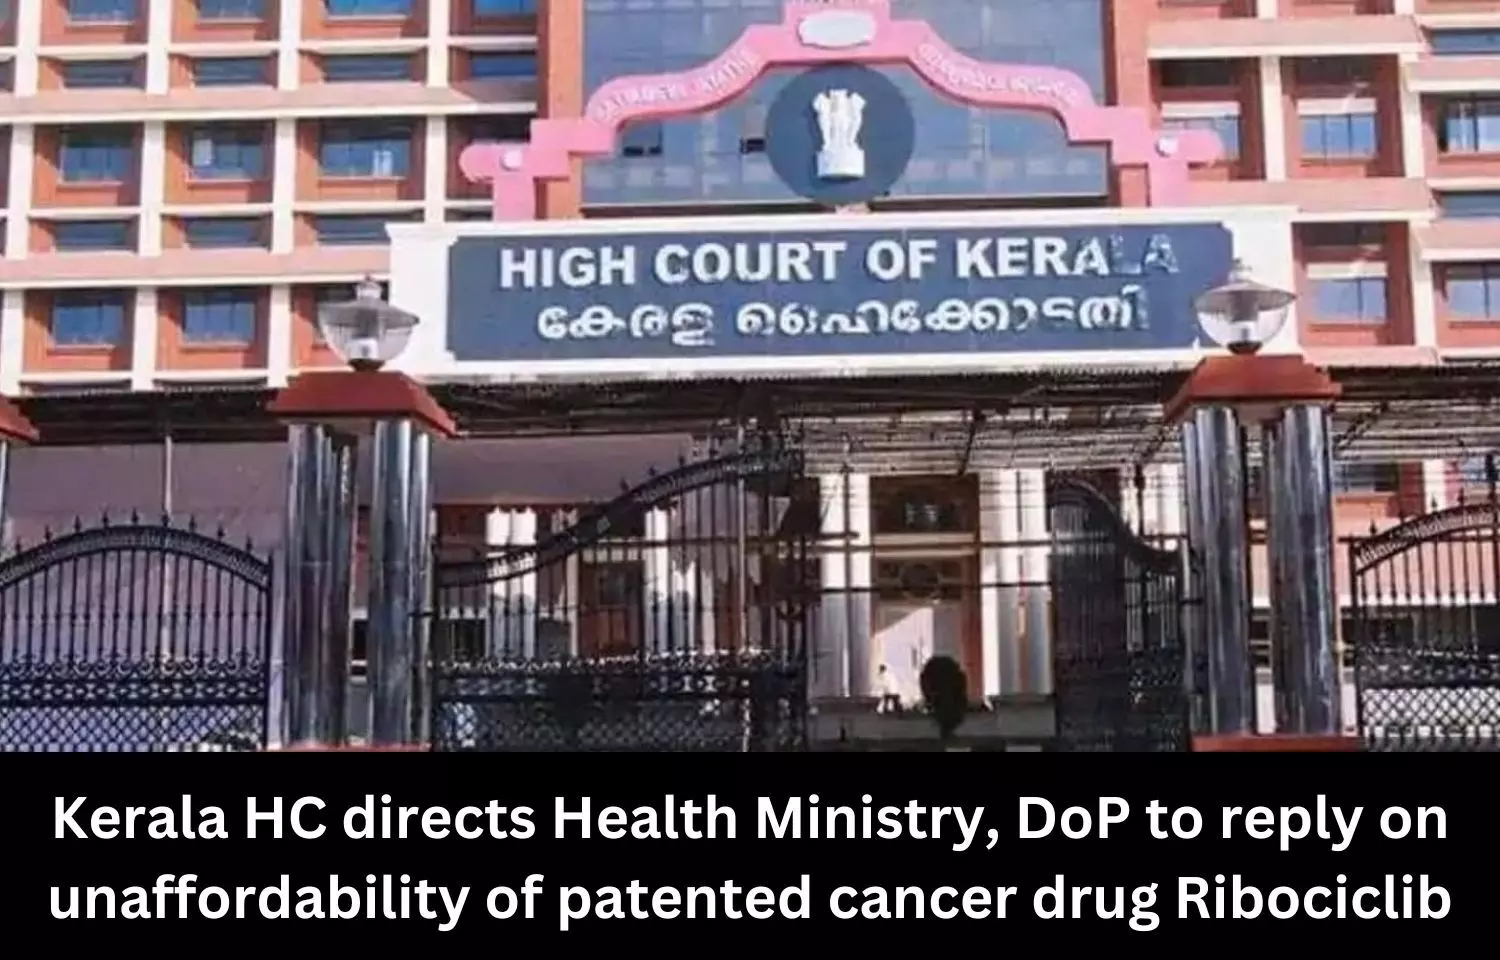 Kerala HC directs Health Ministry, DoP to reply on unaffordability of patented cancer drug Ribociclib